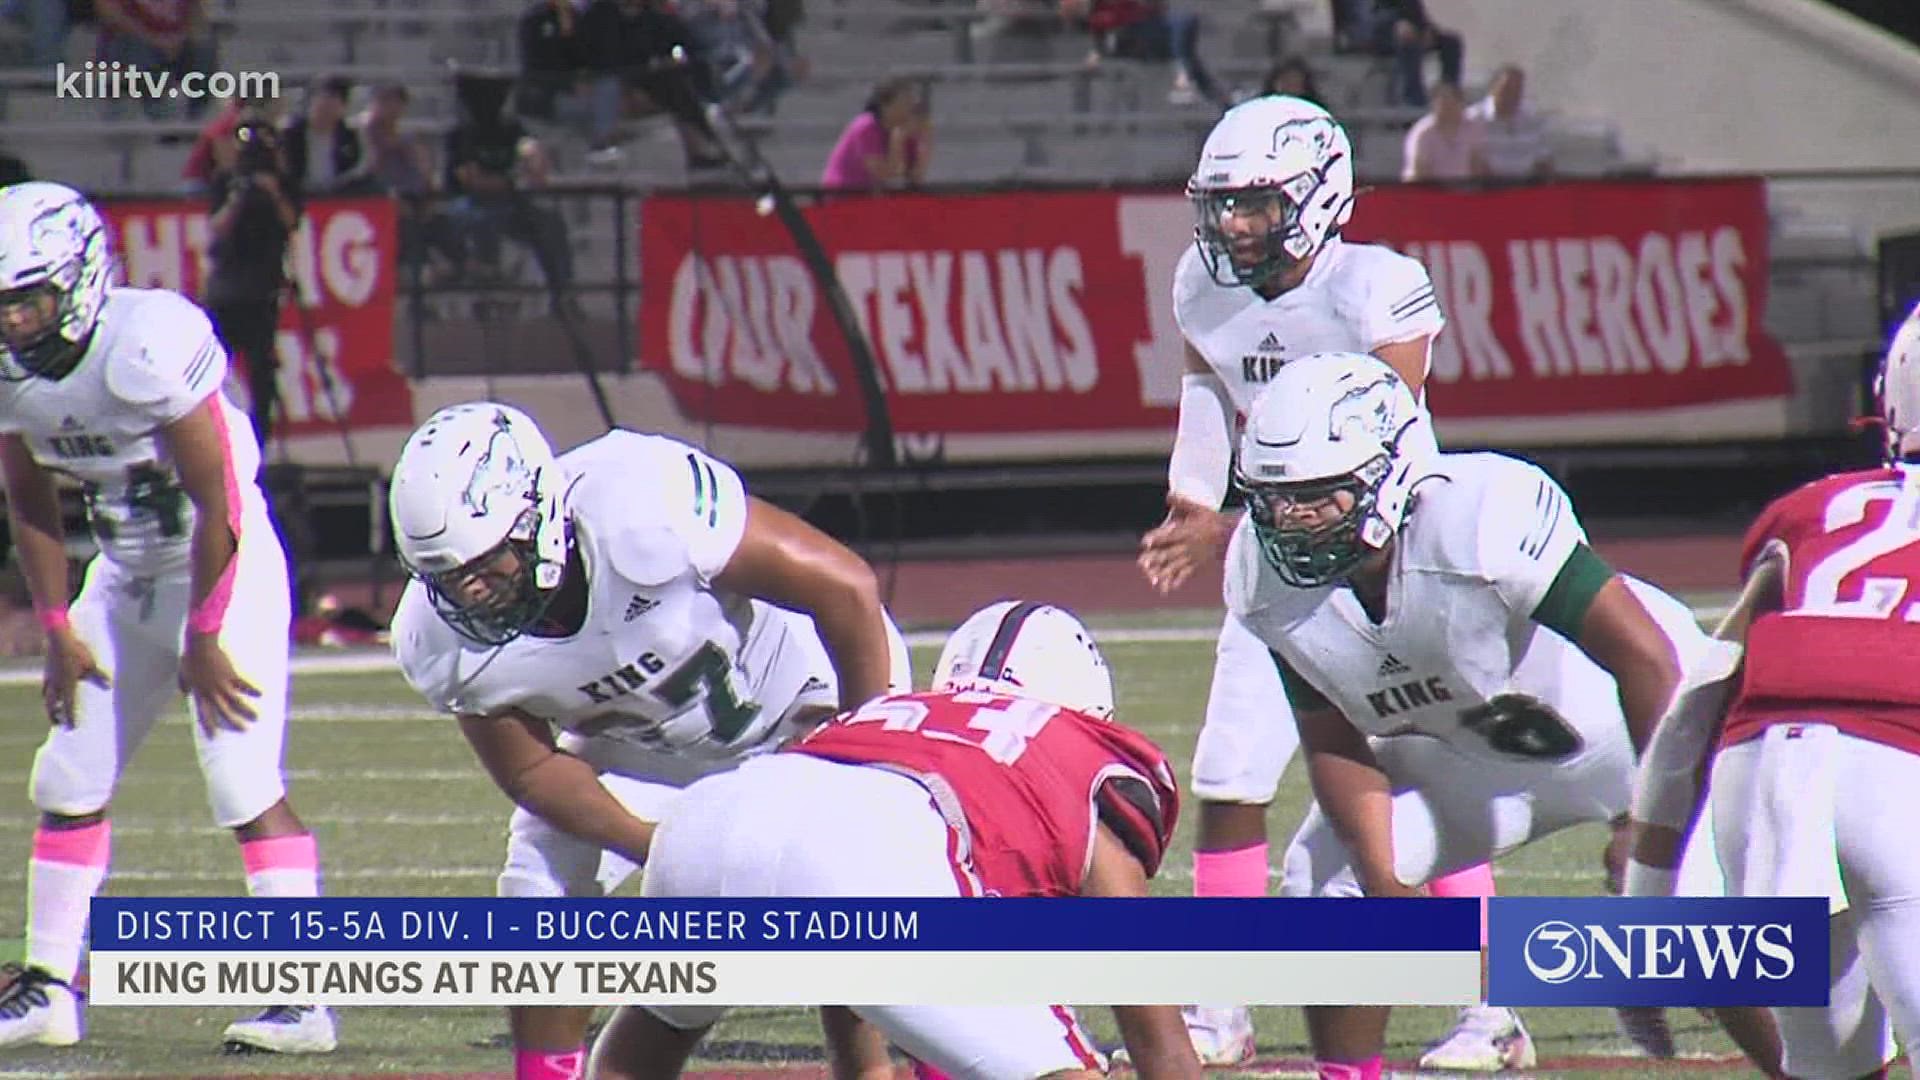 The Mustangs rolled 27-0 to top the Texans and earn their first victory in District 15-5A Div. I.